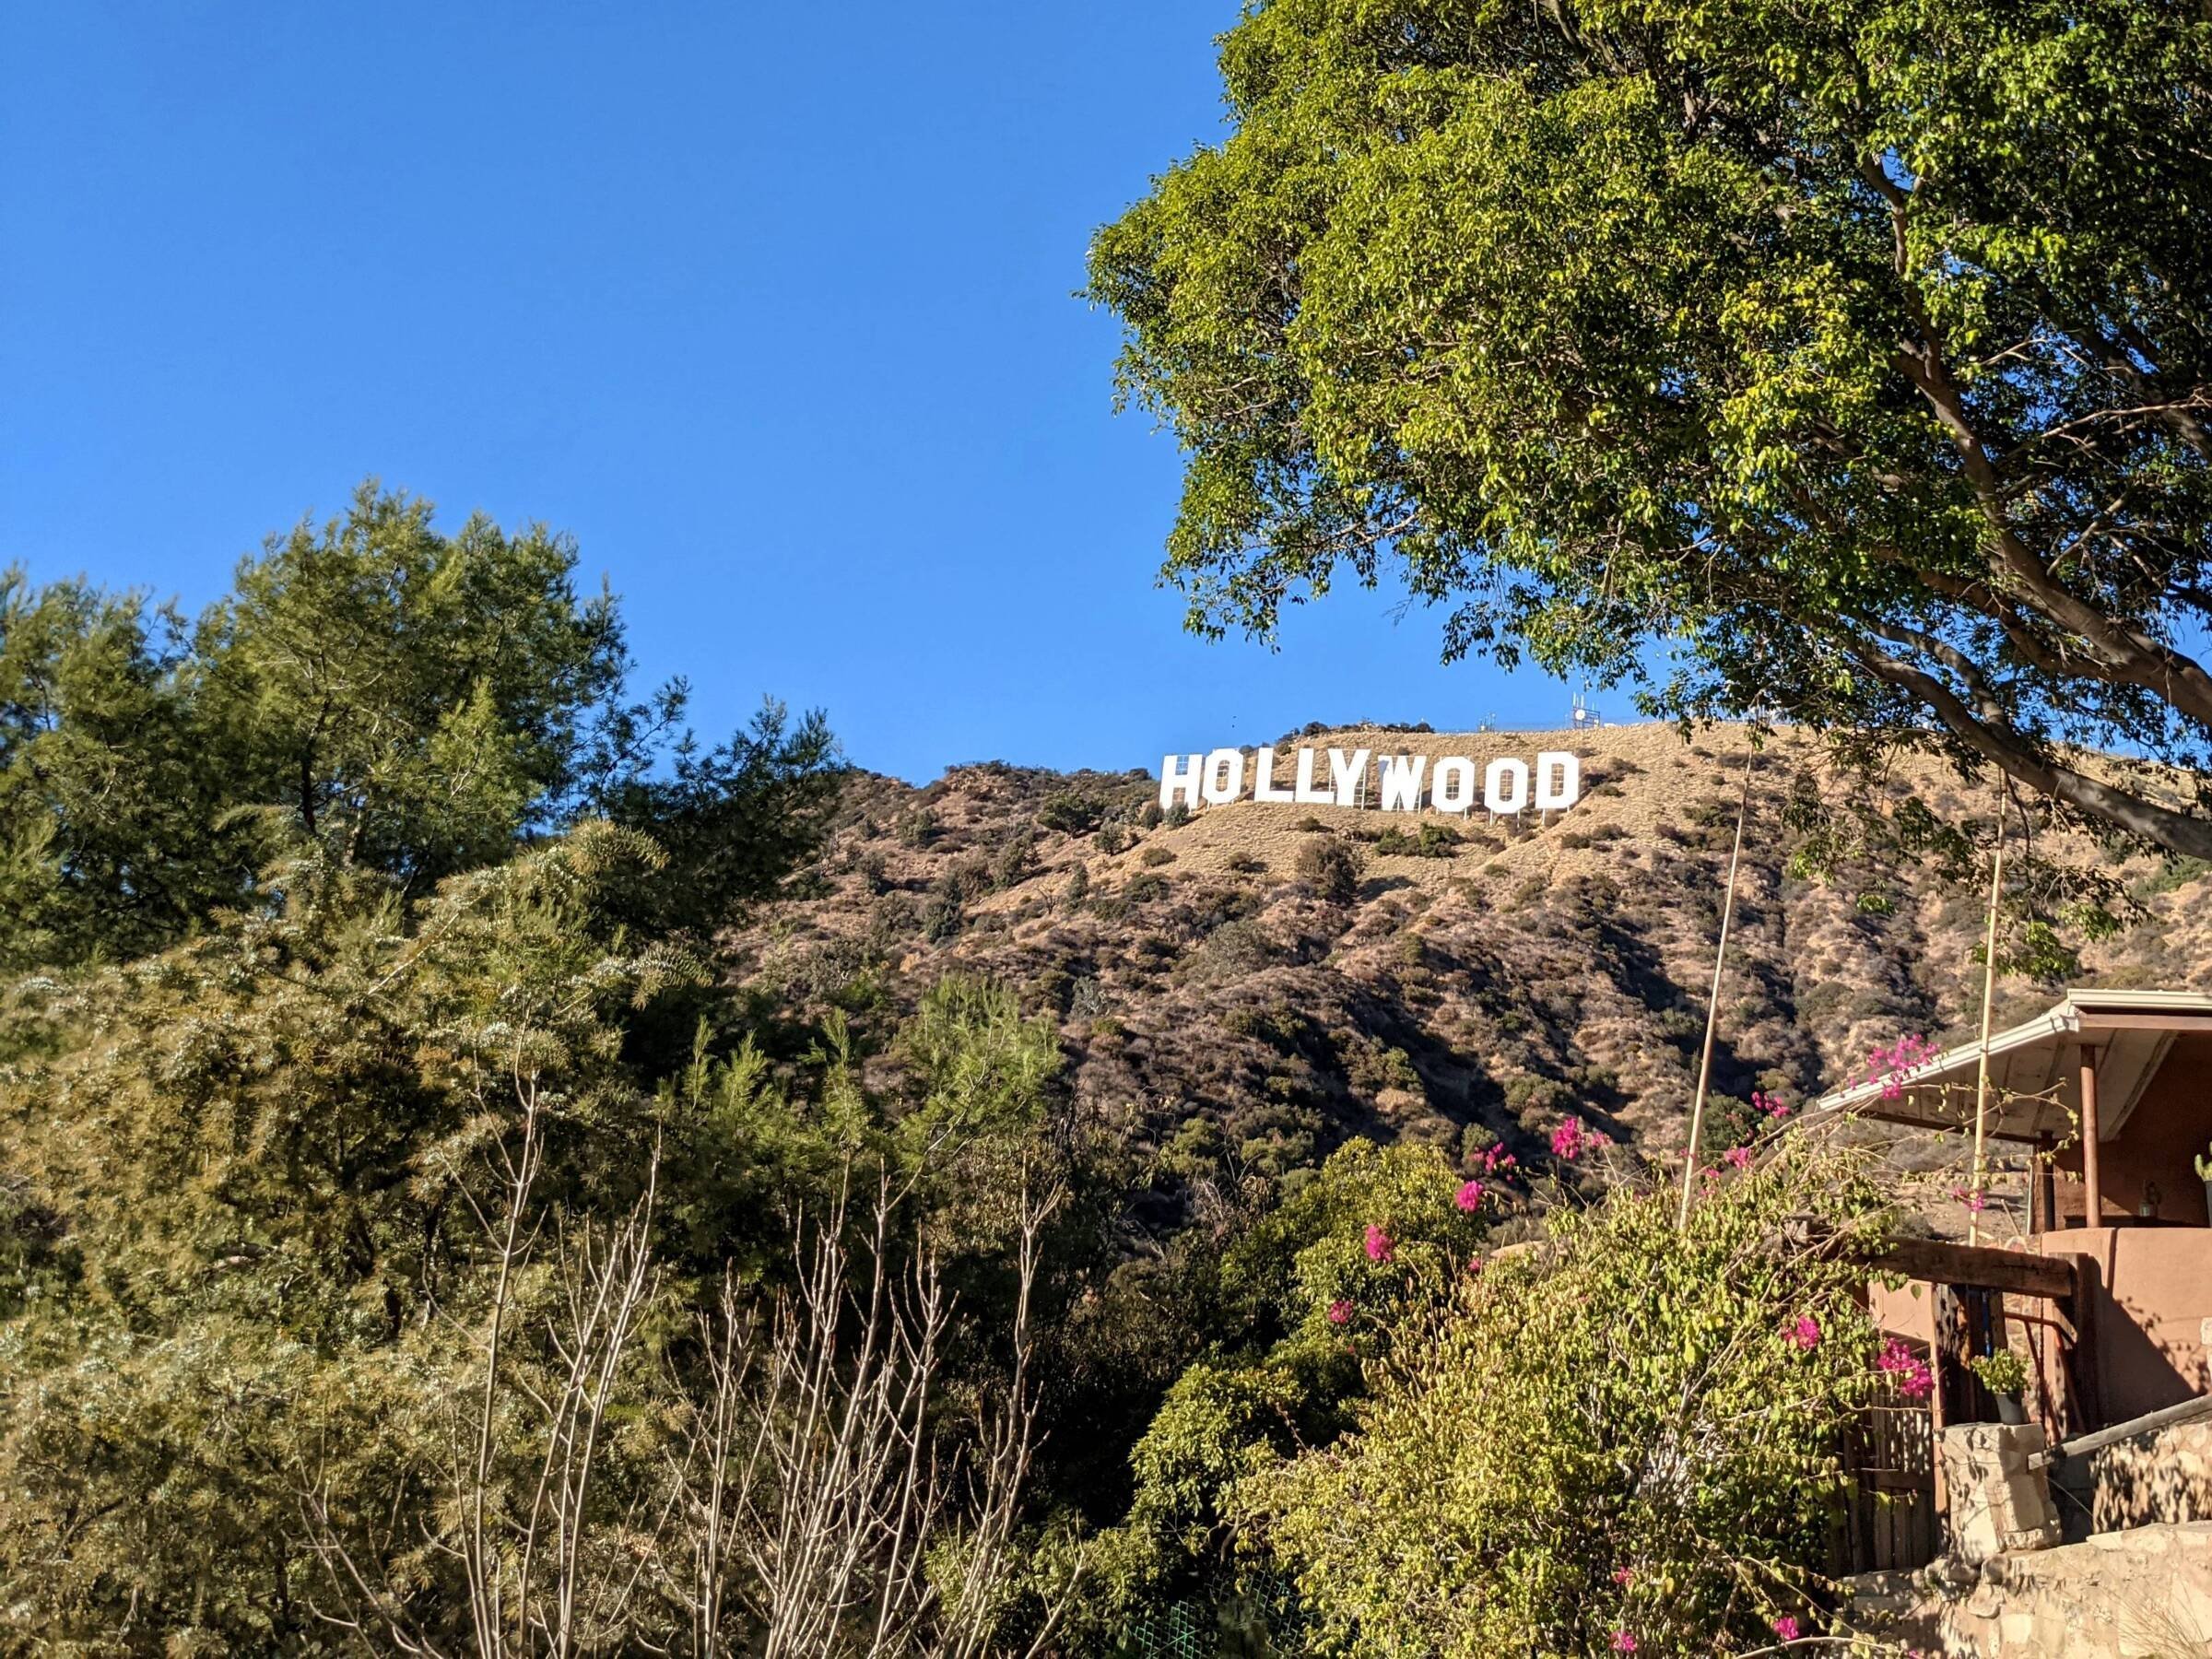 Hollywood-Sign-in-the-Hills-Blue-Sky.jpg